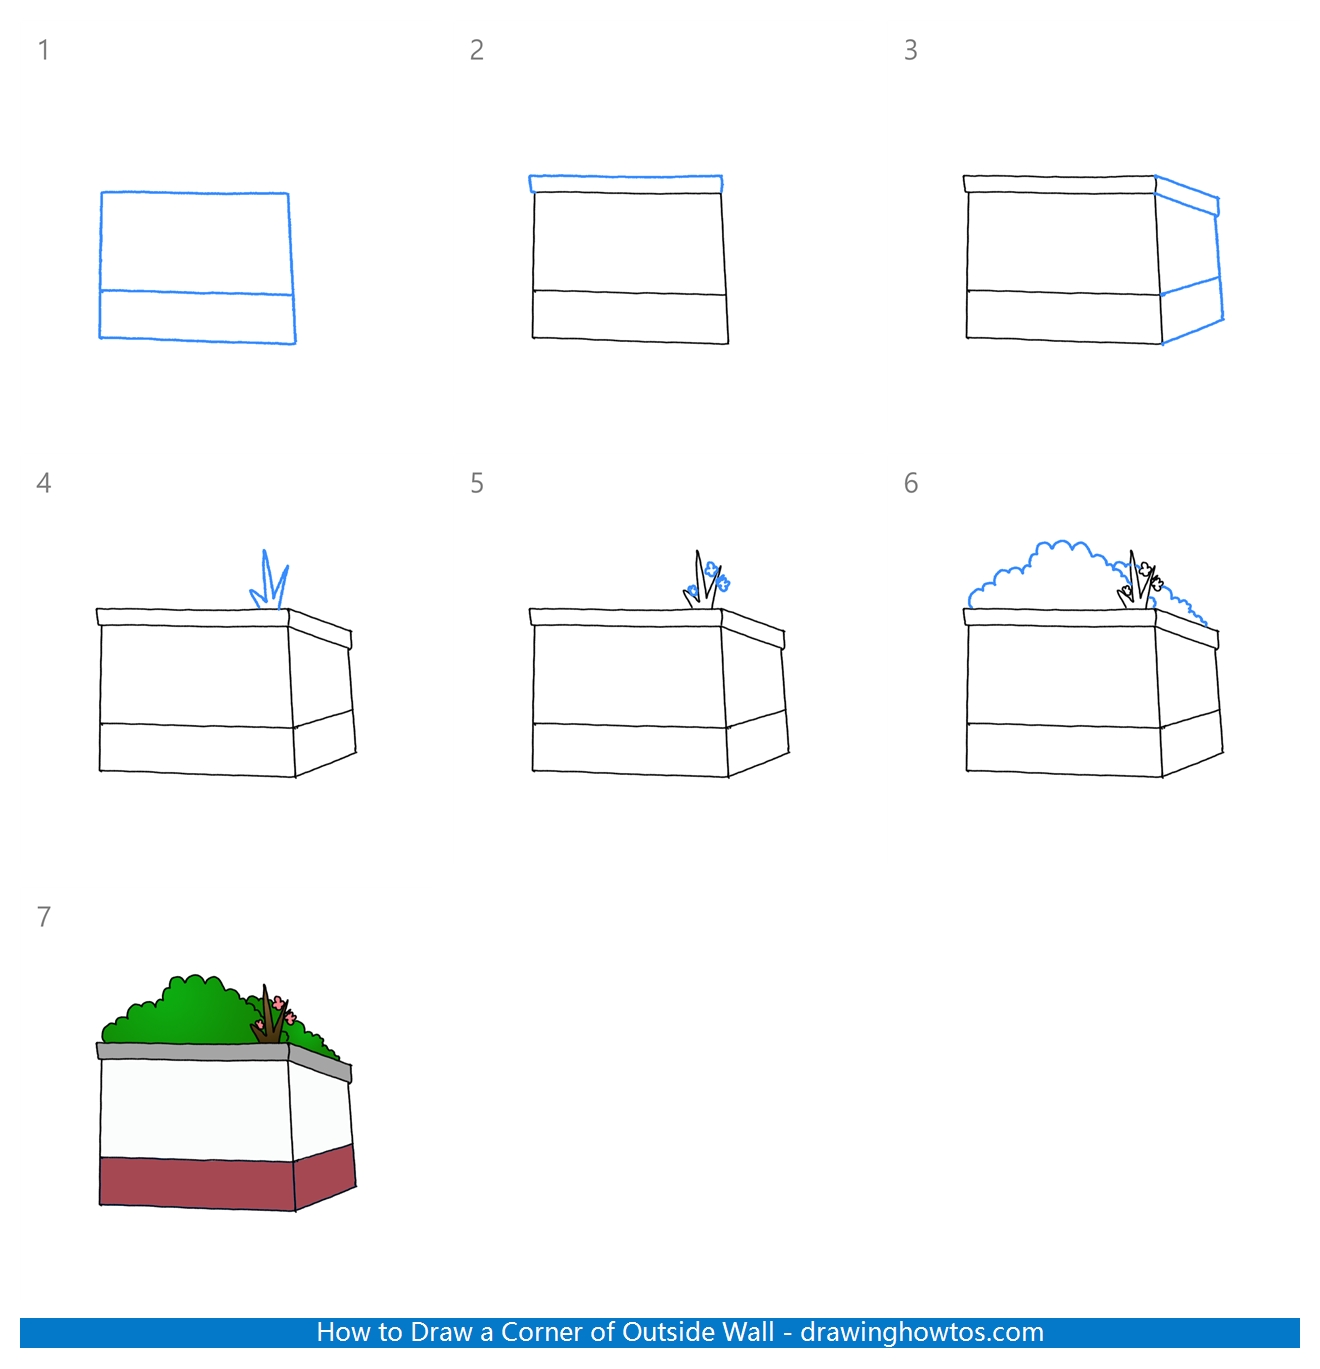 How to Draw a Corner of Outside Wall Step by Step